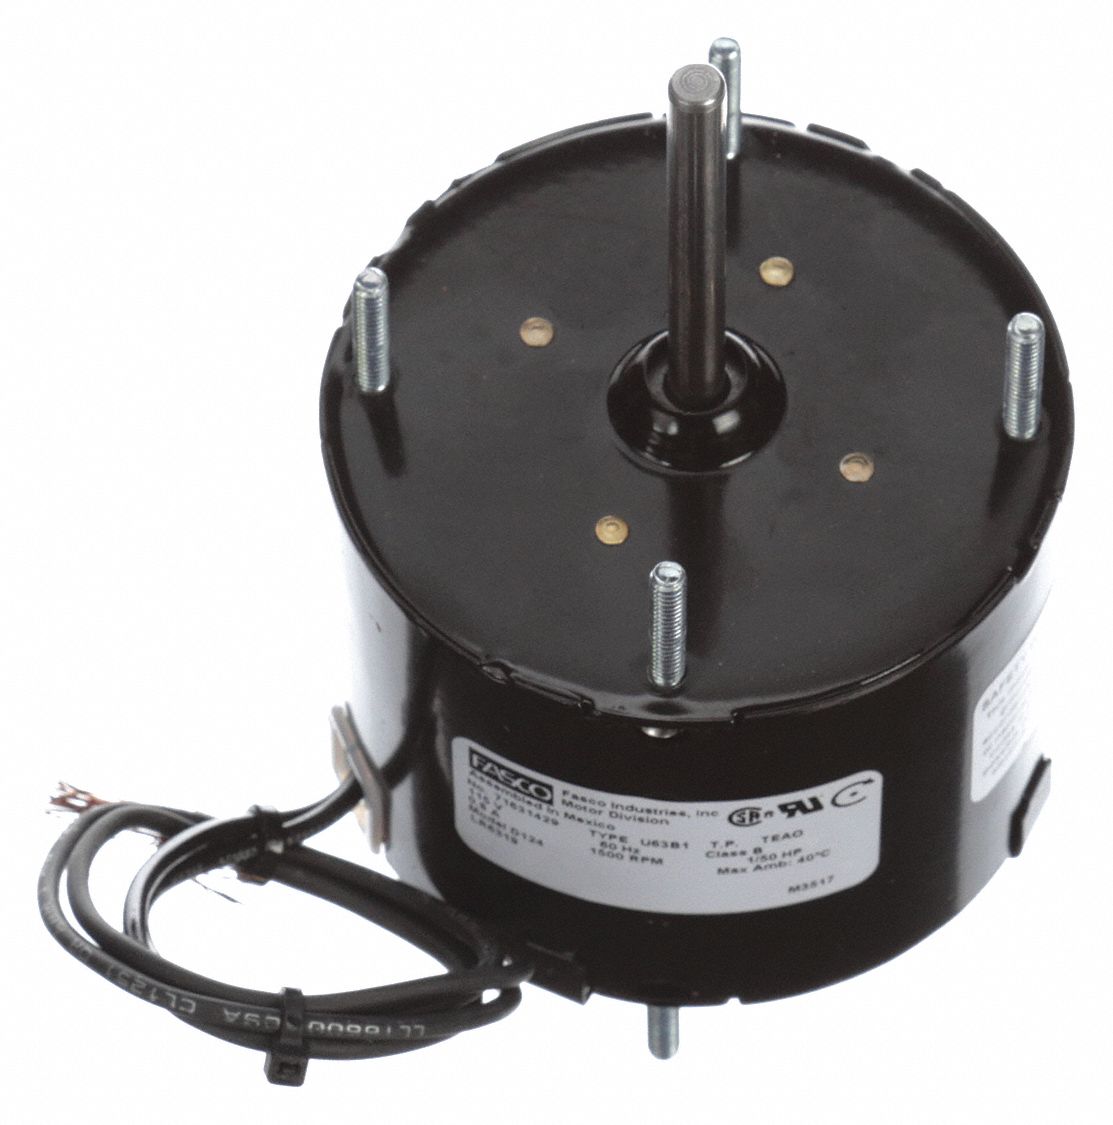 1050rpm 4.5-3.4 amps Fasco D180 5 Frame Open Ventilated Shaded Pole Direct Drive Blower Motors with Sleeve Bearing 1/8-1/11HP 115V 60Hz 